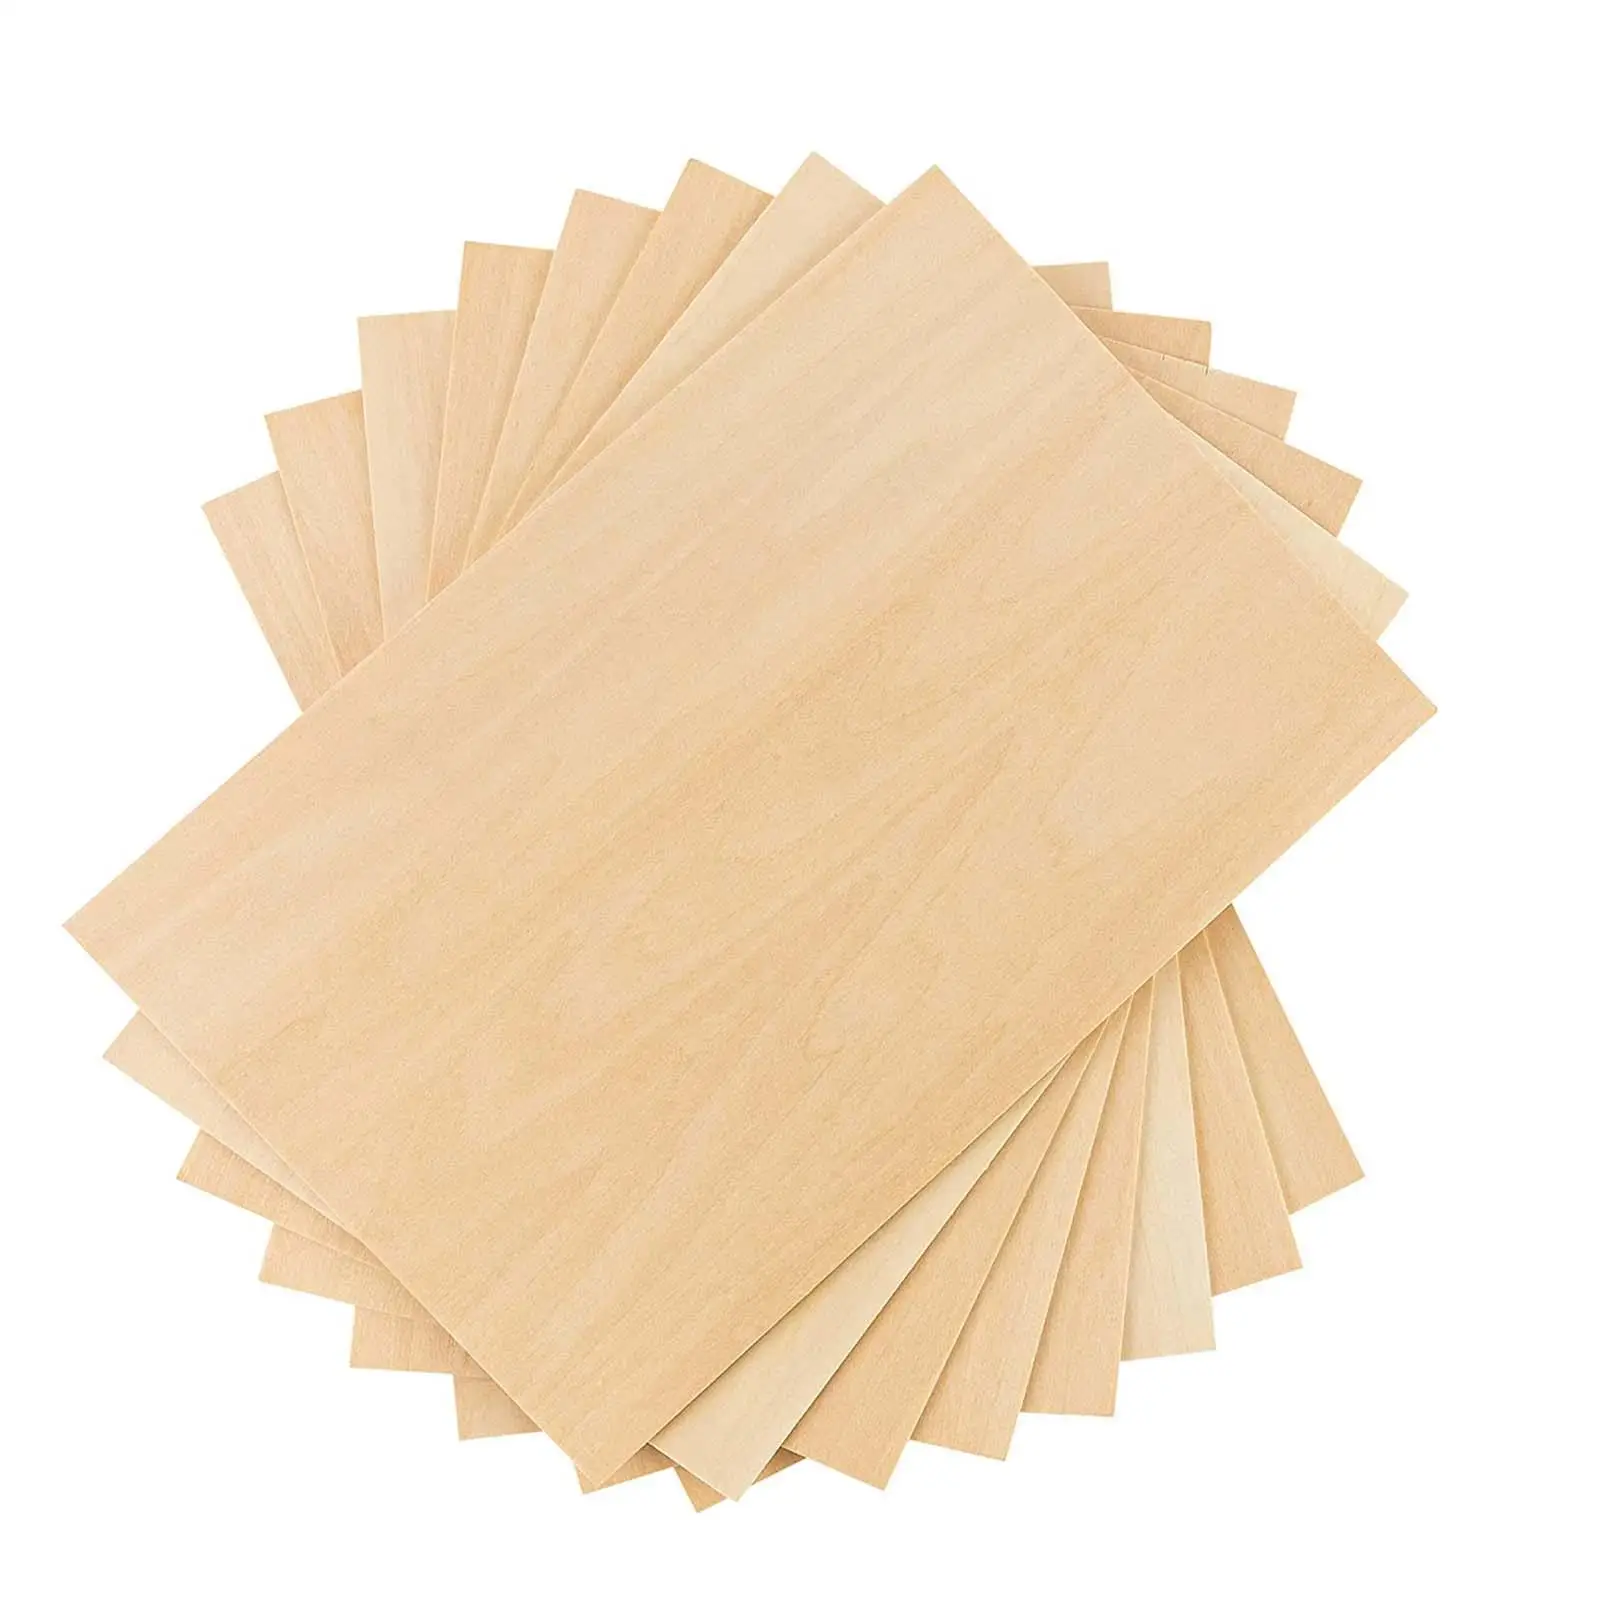 8x Unfinished Wood Thin Plywood Board Wood Sheets Board for DIY Project Miniature Aircraft Crafts Sailboat Models Mini House